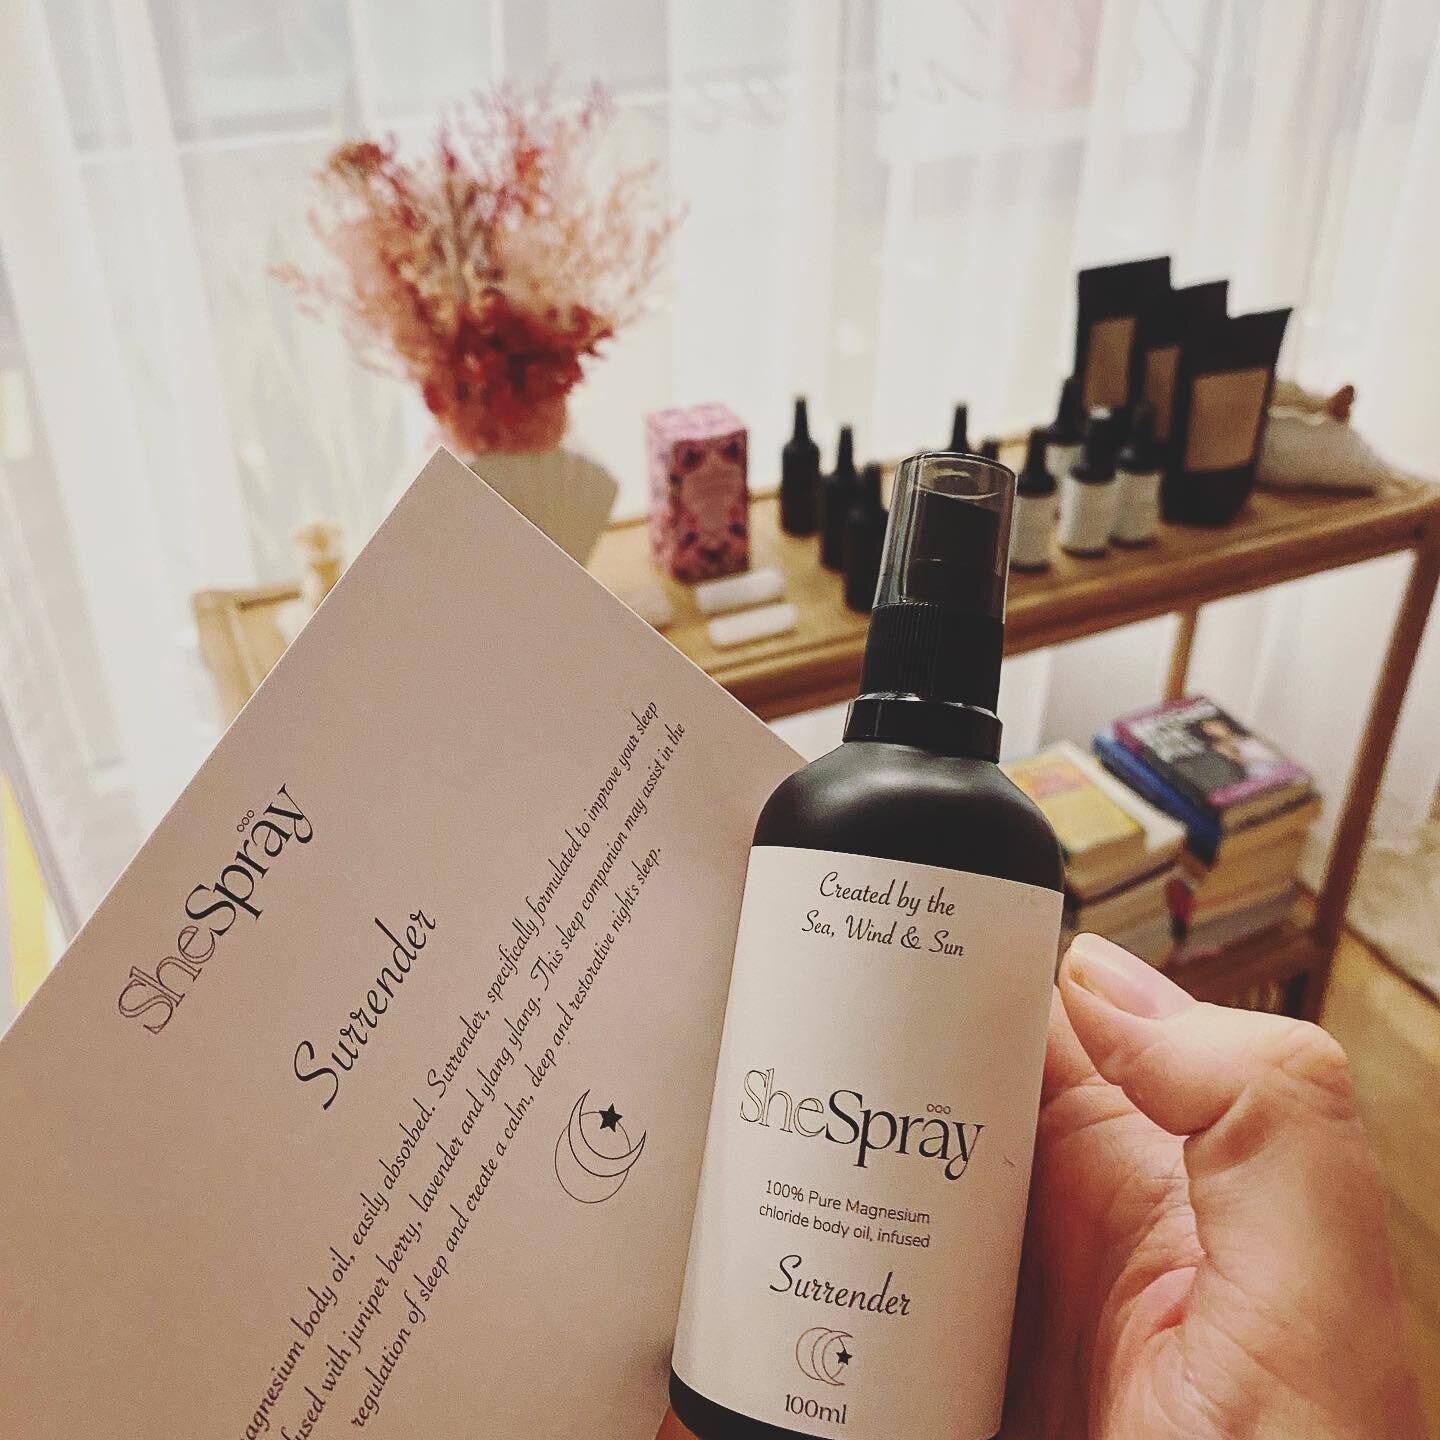 Love this stuff @she.spray ✨🌸 It&rsquo;s the first thing I reach for now when I can feel my neck and shoulders getting tight and sore. Can&rsquo;t wait to lather some on my feet tonight before bed 🌌 Get some from the @ellebrownwellness studio in Br